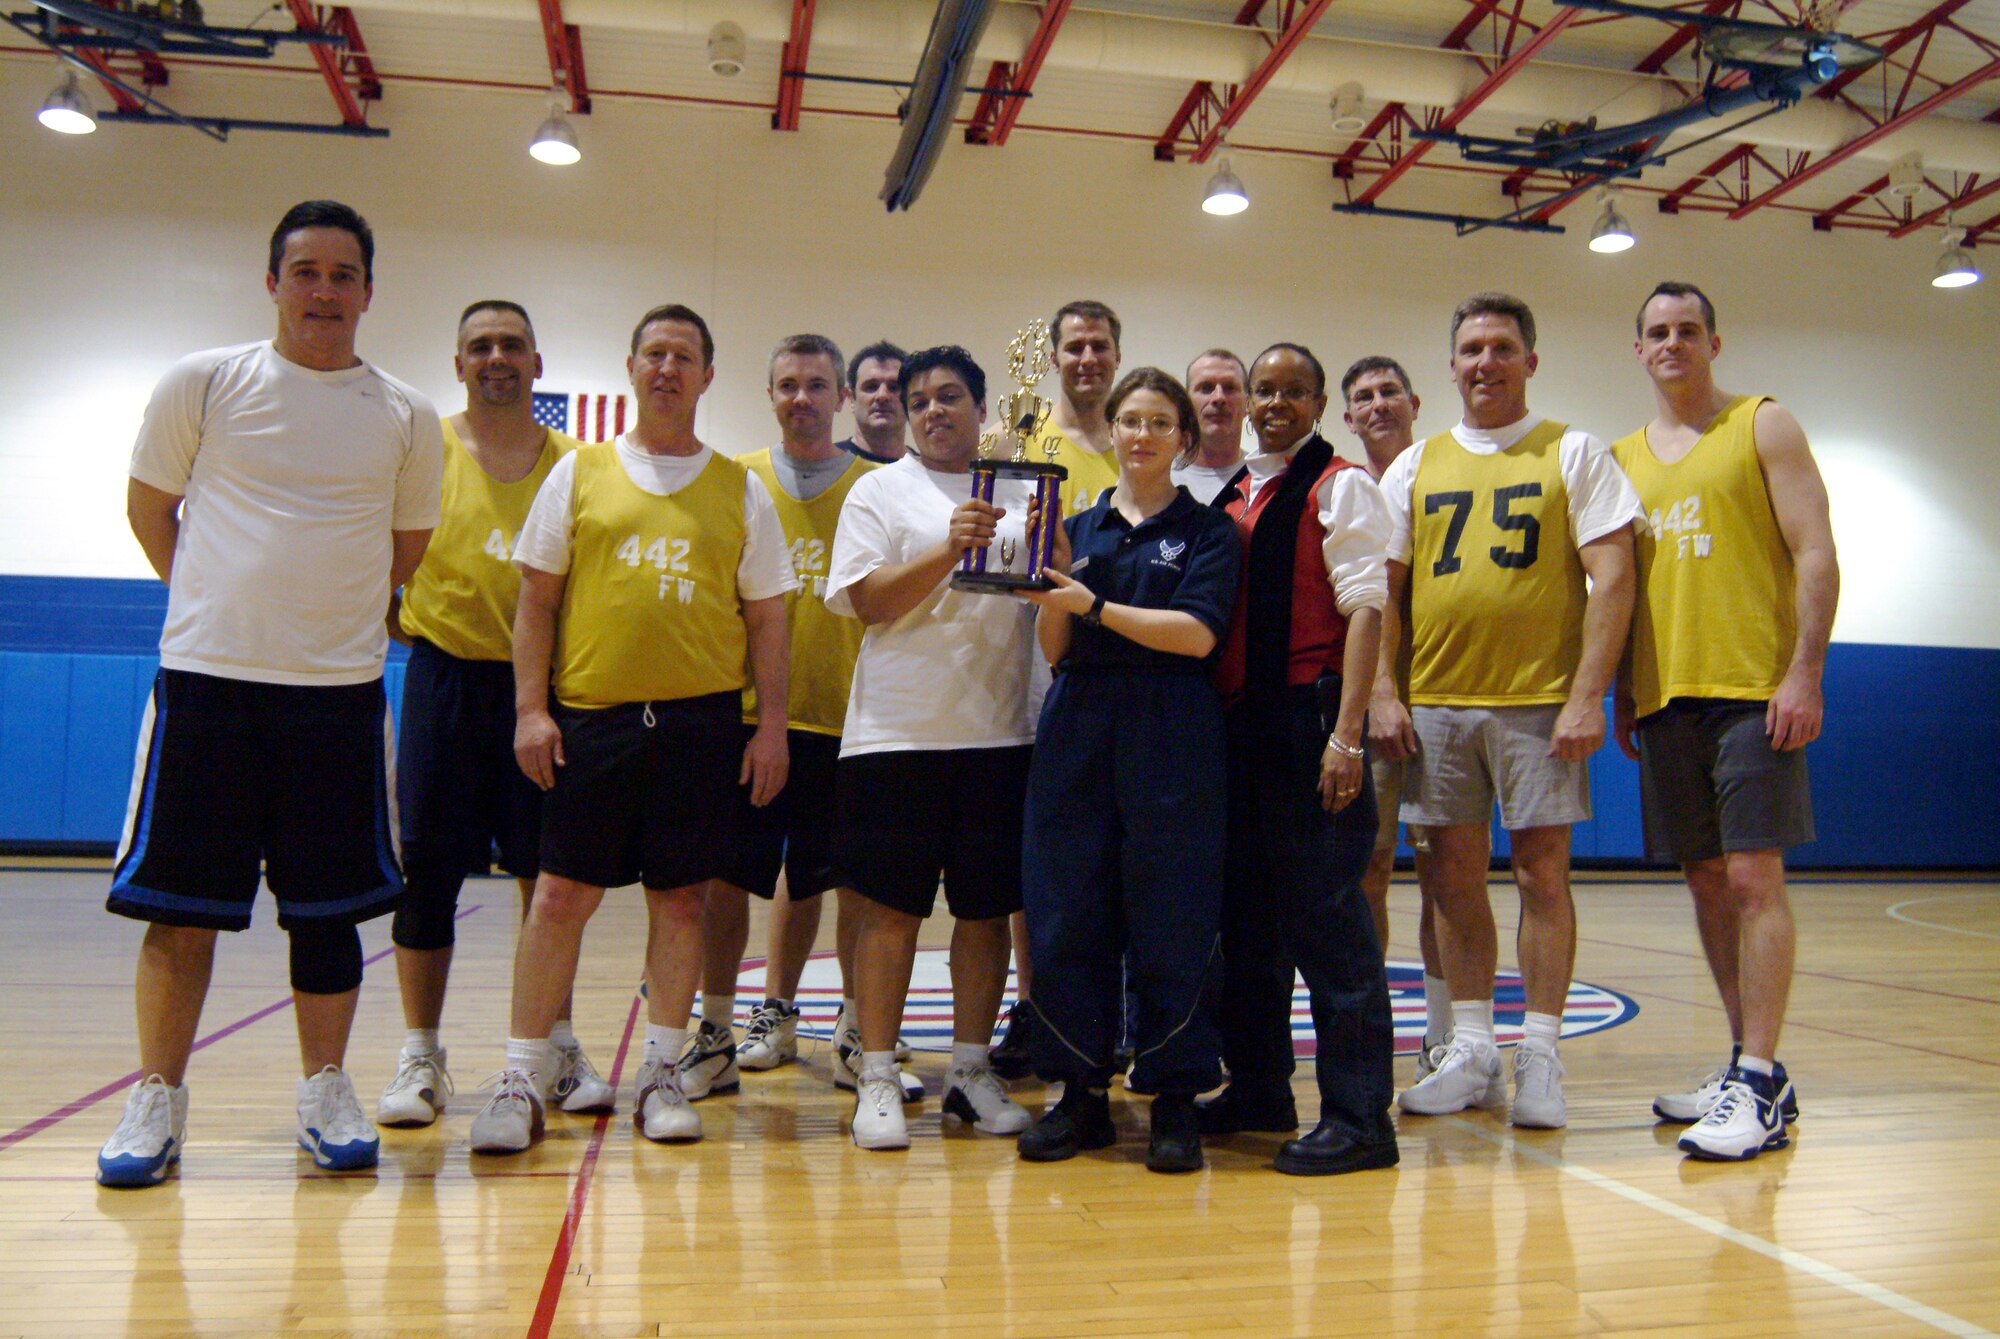 The 442nd Fighter Wing's Over-30, Intramural Basketball Team accept the 2007 championship trophy in the Whiteman Air Force Base gymnasium Feb. 15.  The team beat the 509th Security Forces Team 42-31 to win it's fourth championship in five years.  (U.S. Air Force photo/Maj. David Kurle)